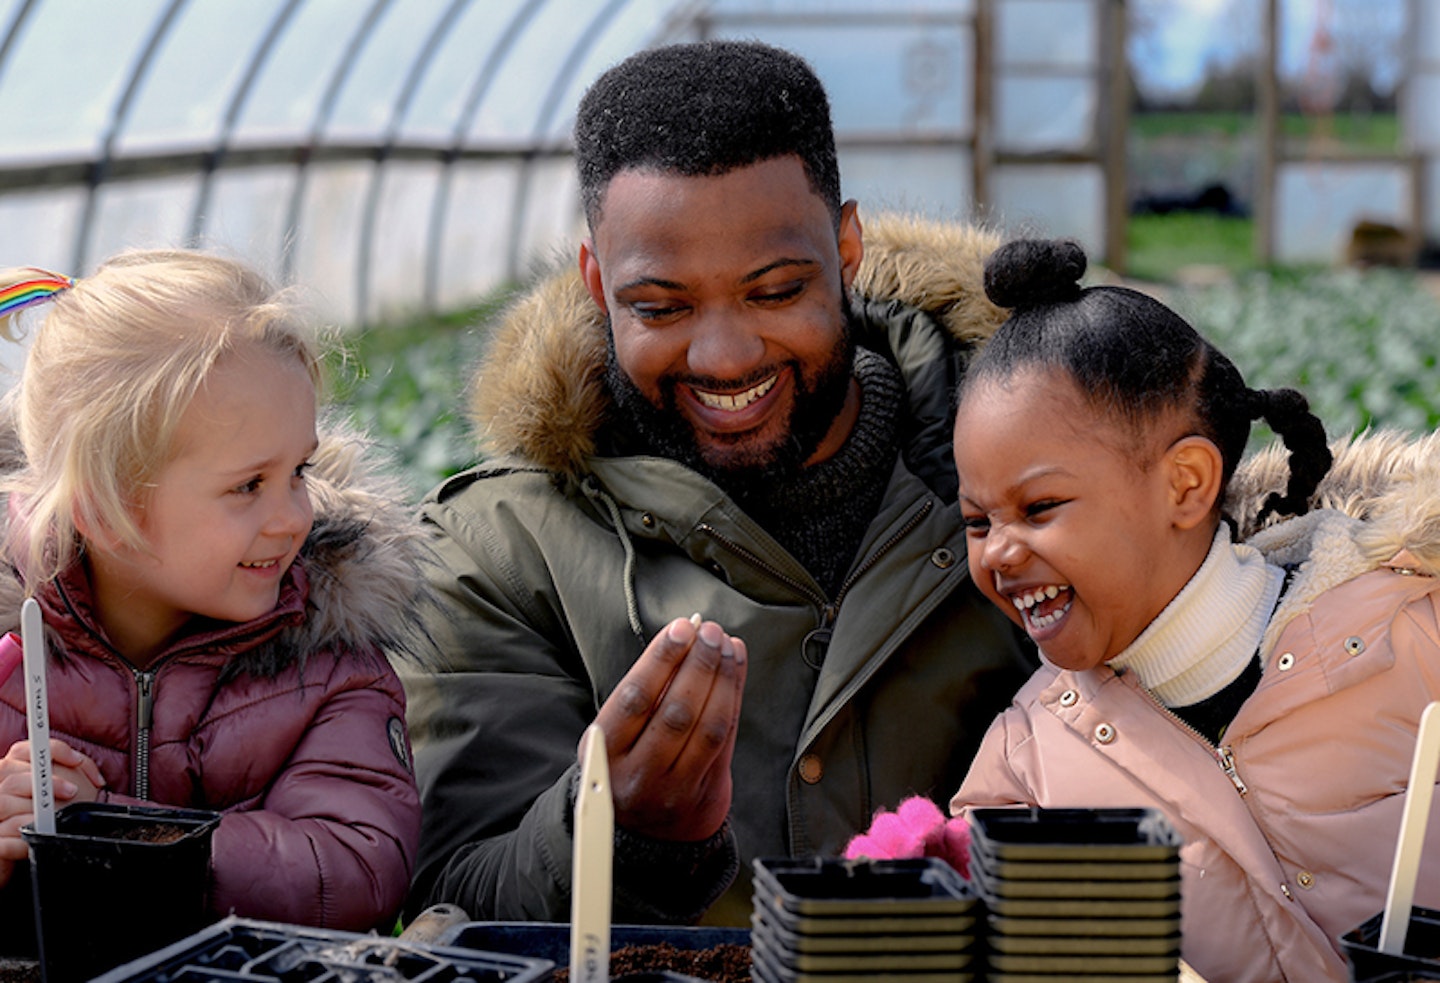 JB Gill: ‘I have to get creative to get my daughter to try new foods!’